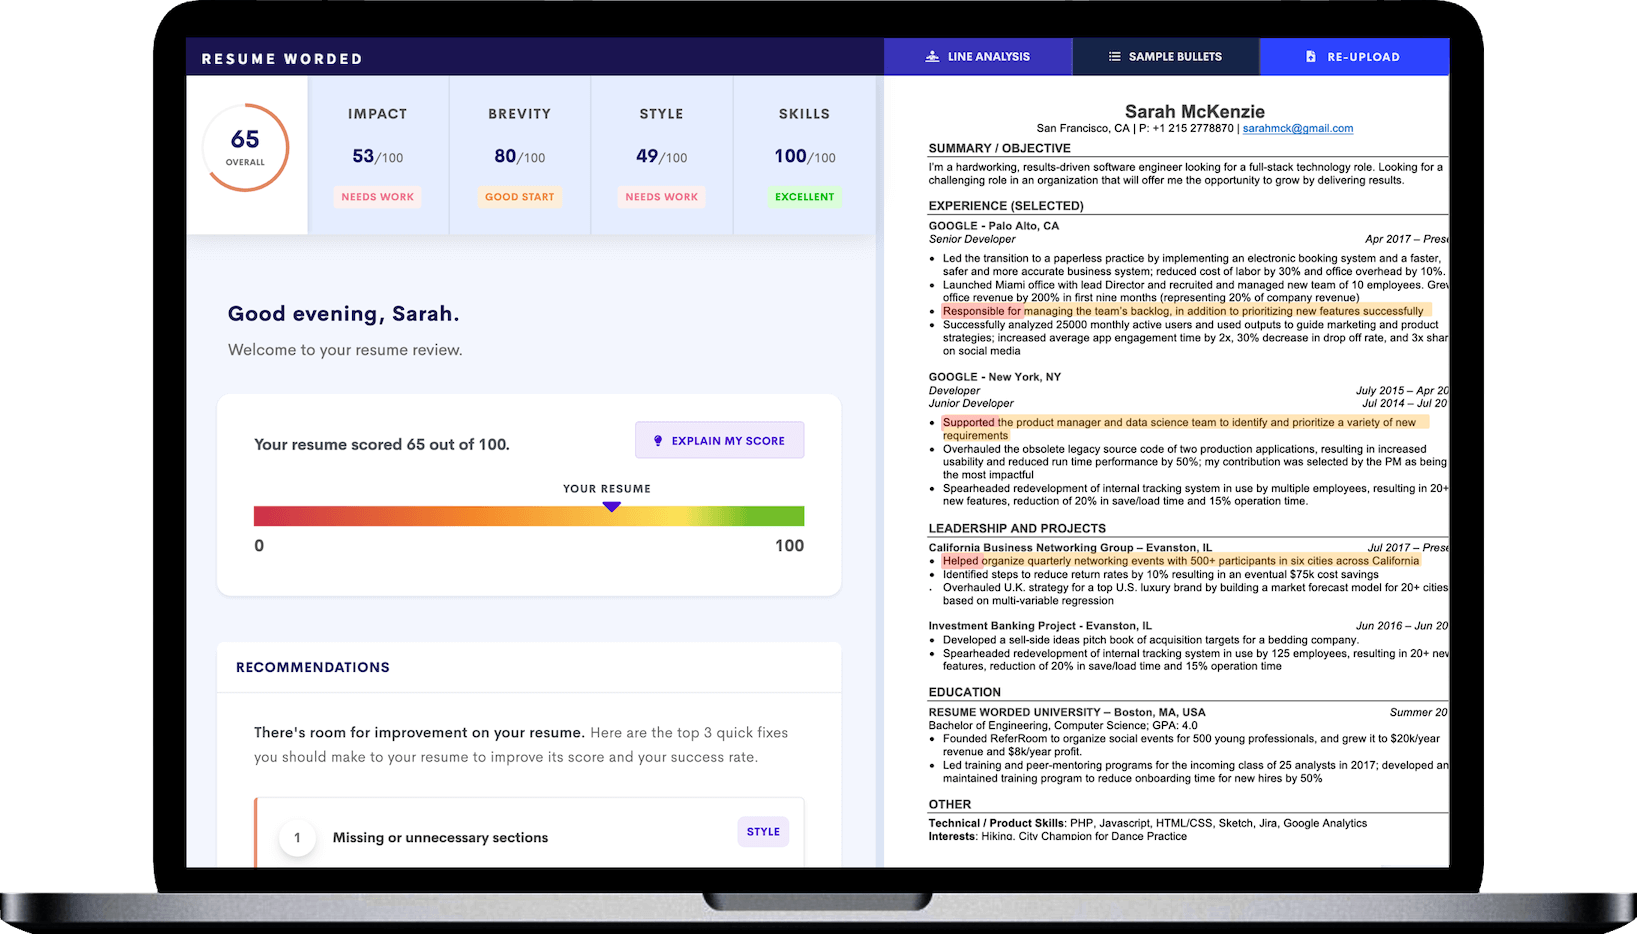 Our all-new resume checker is powered by AI